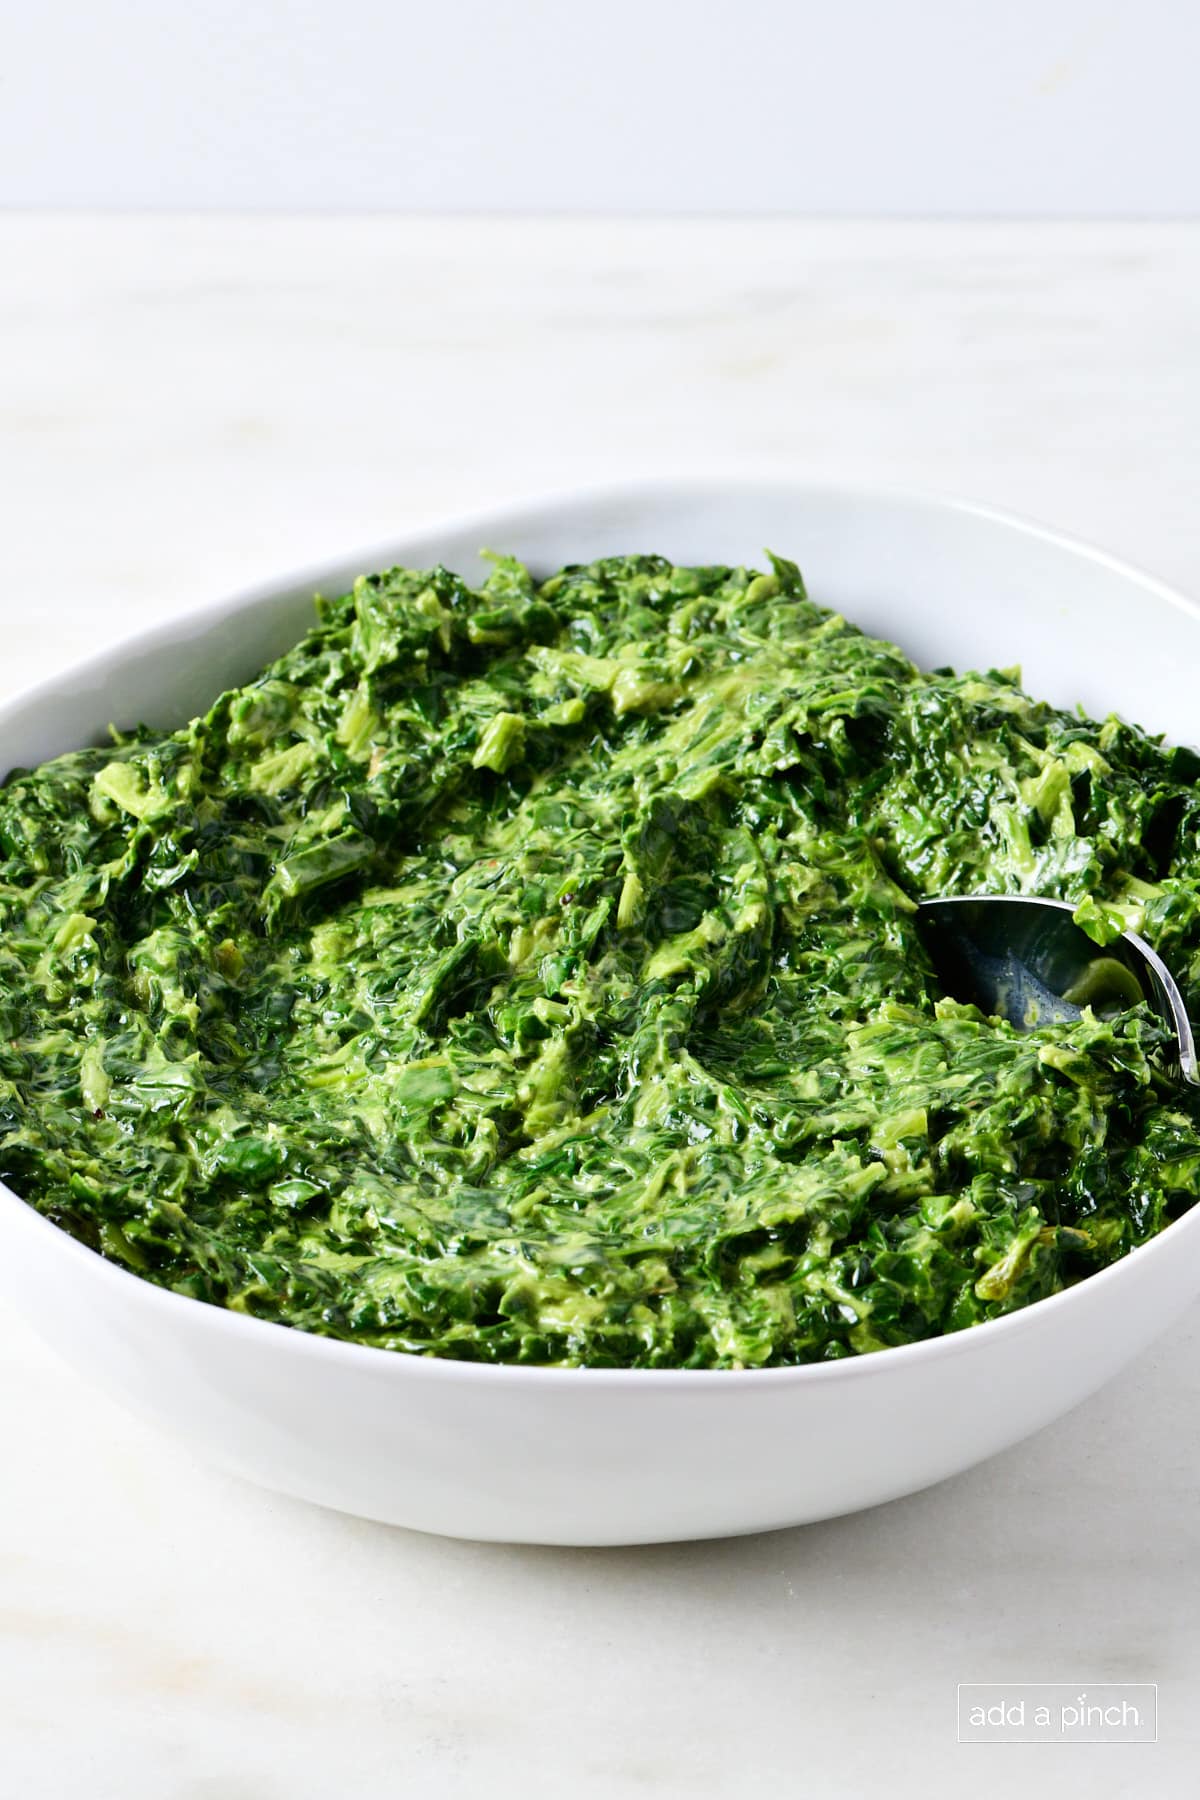 Creamed spinach in a white serving bowl with a spoon.